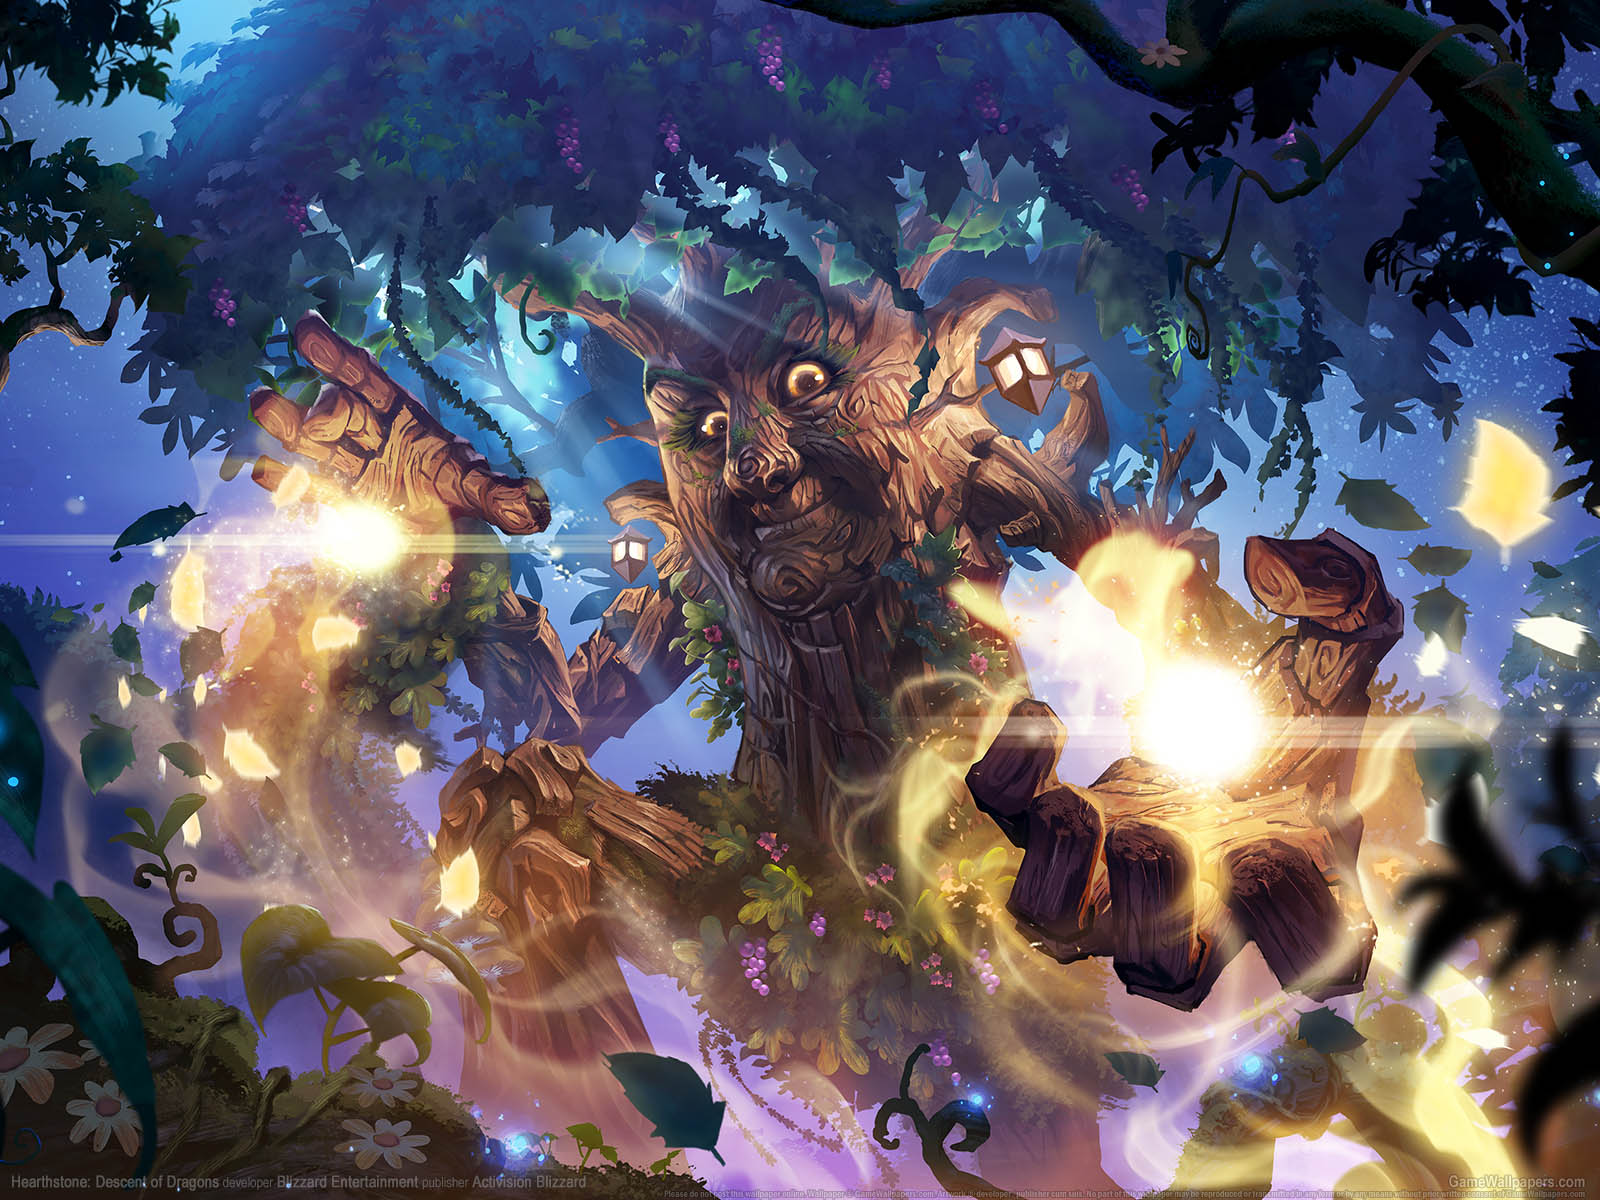 Hearthstone%253A Descent of Dragons wallpaper 02 1600x1200